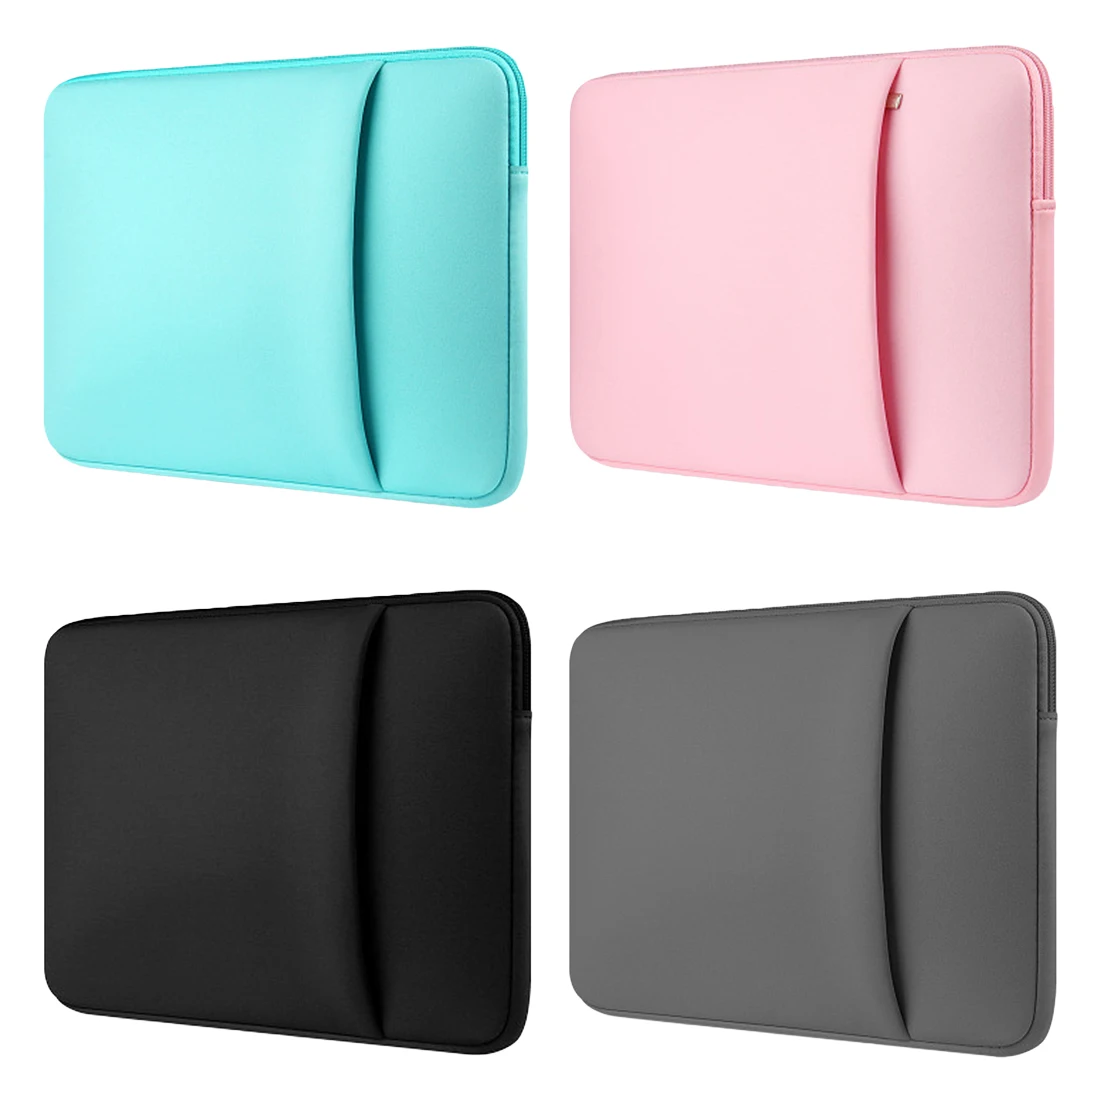 Laptop Sleeve Notebook Bag For Macbook Air 13 Pro 11 12 15 15.6 Case Laptop Bag 11 13 14 15 Inch Protective Case Liner Bags